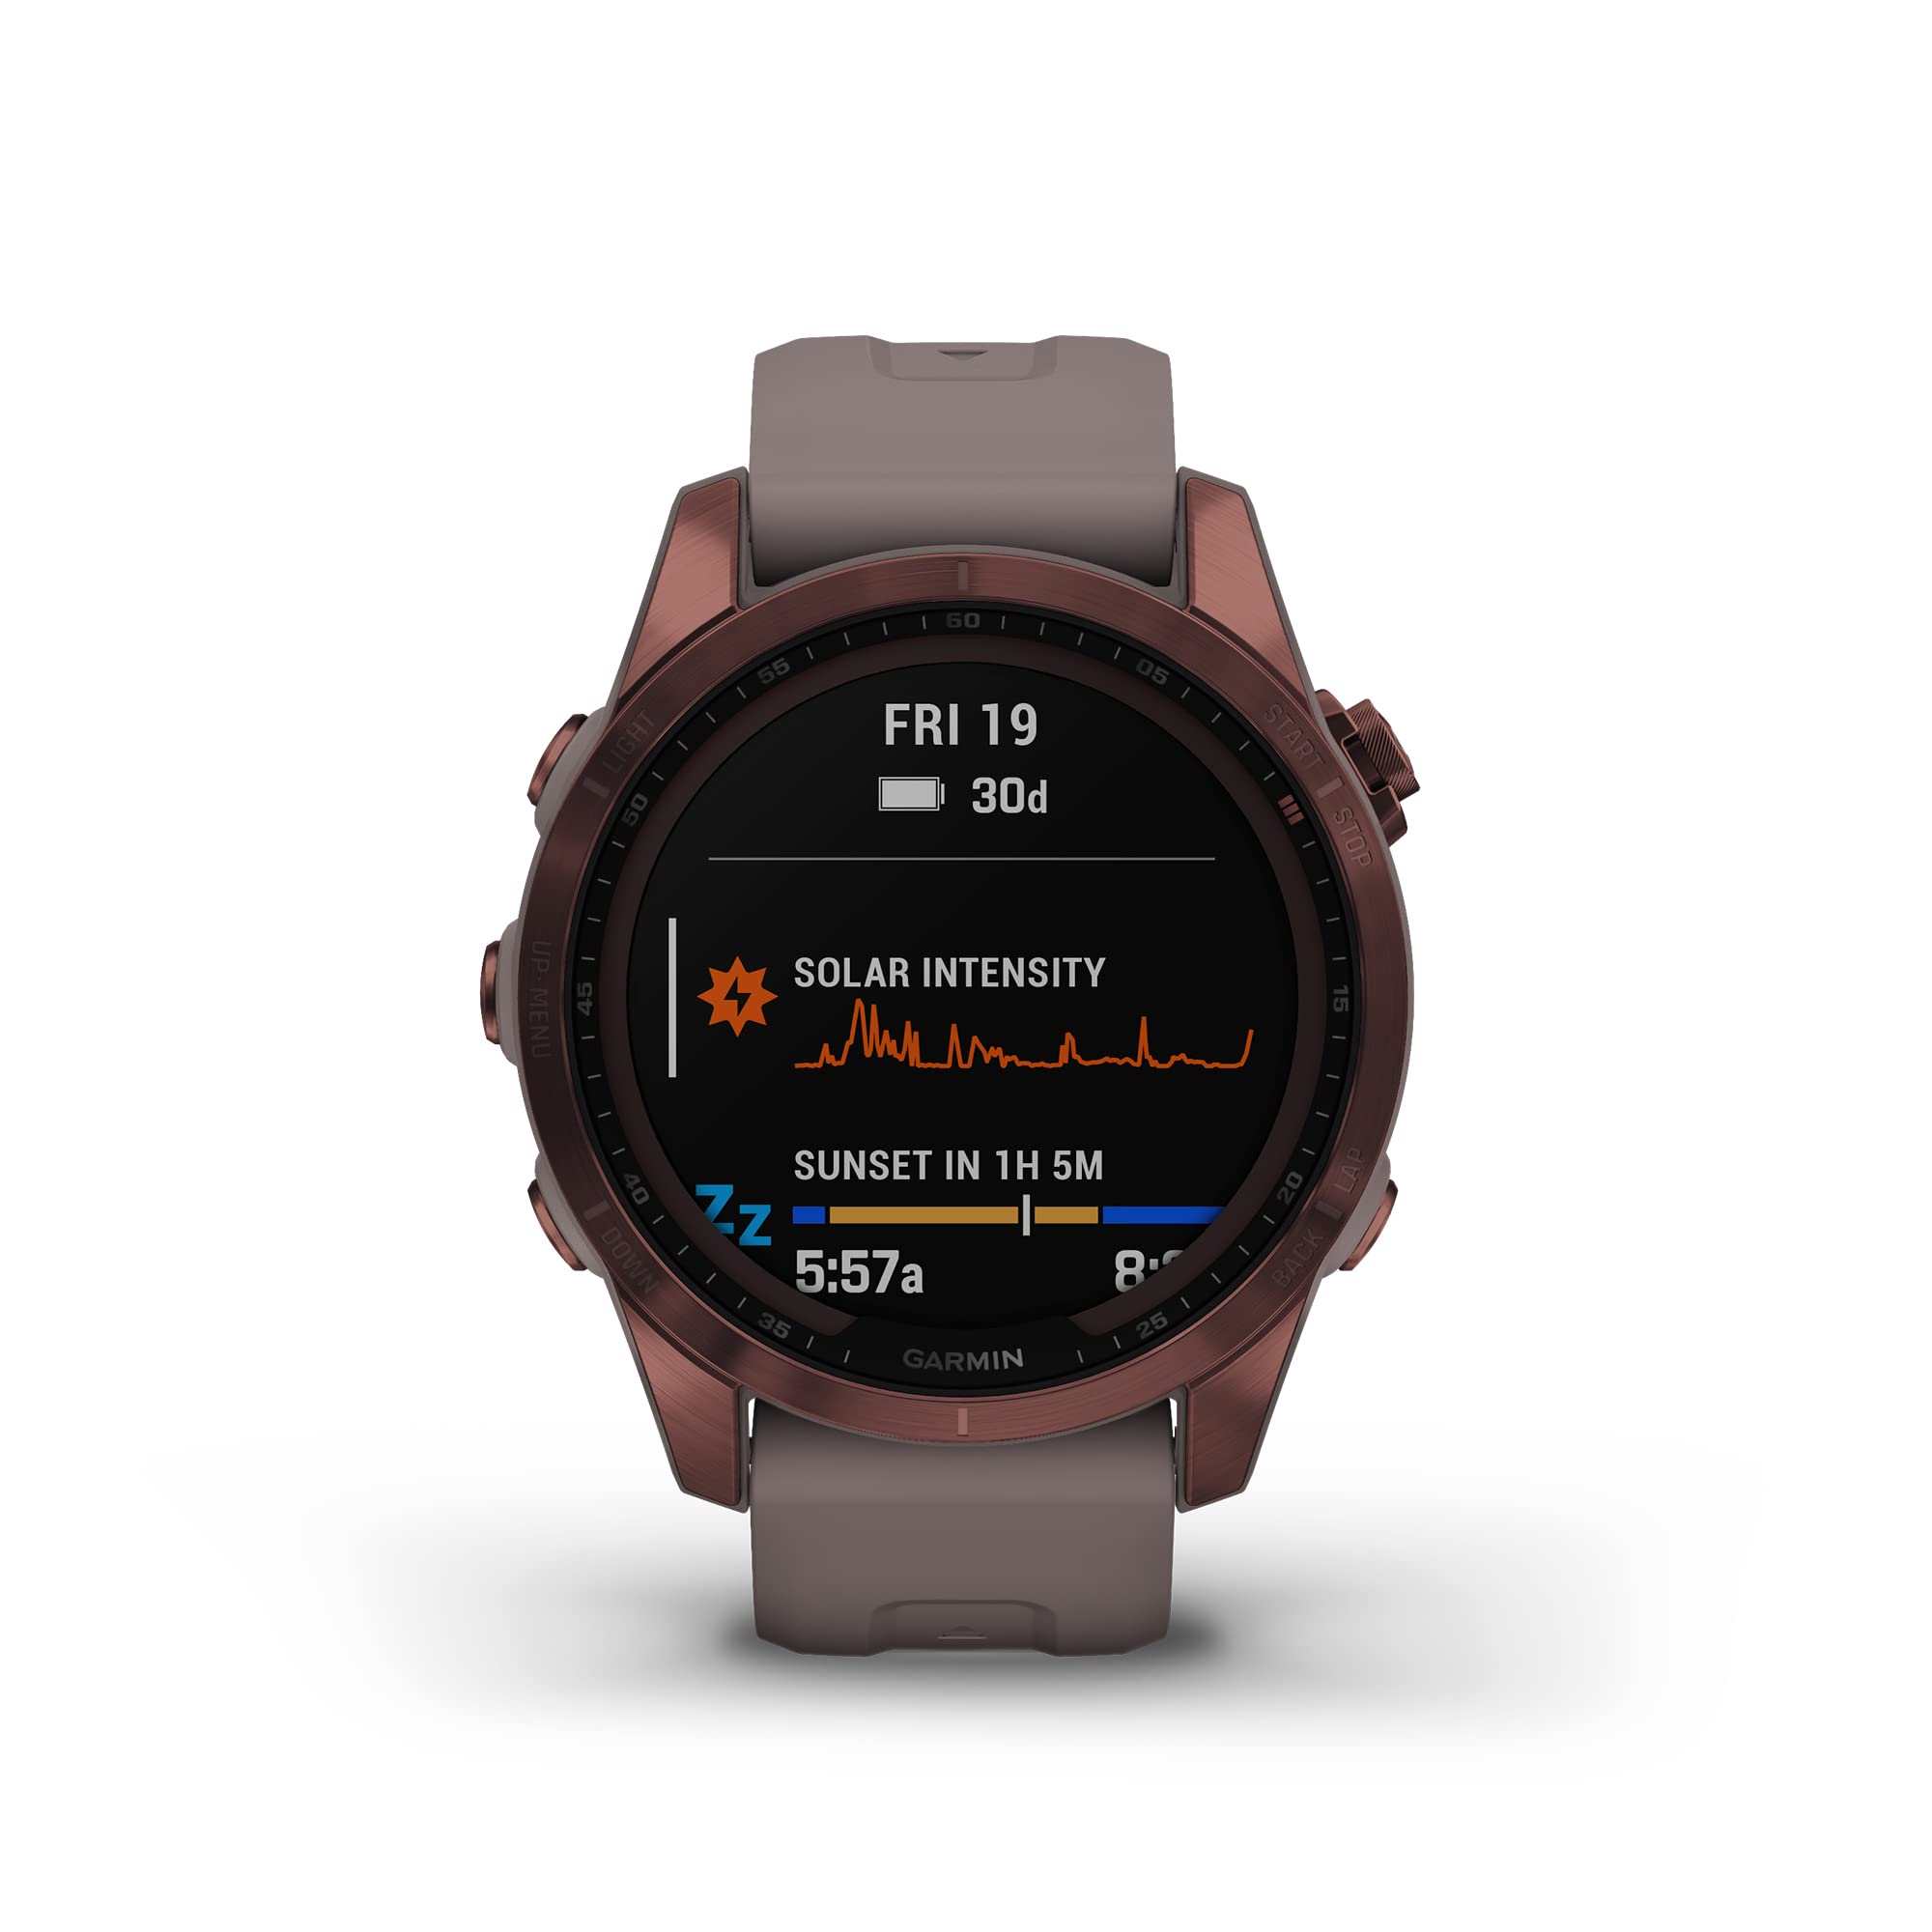 Garmin fenix 7S Sapphire Solar, Smaller adventure smartwatch, with Solar Charging Capabilities, Rugged watch with GPS, touchscreen, wellness features, dark bronze titanium with shale gray band